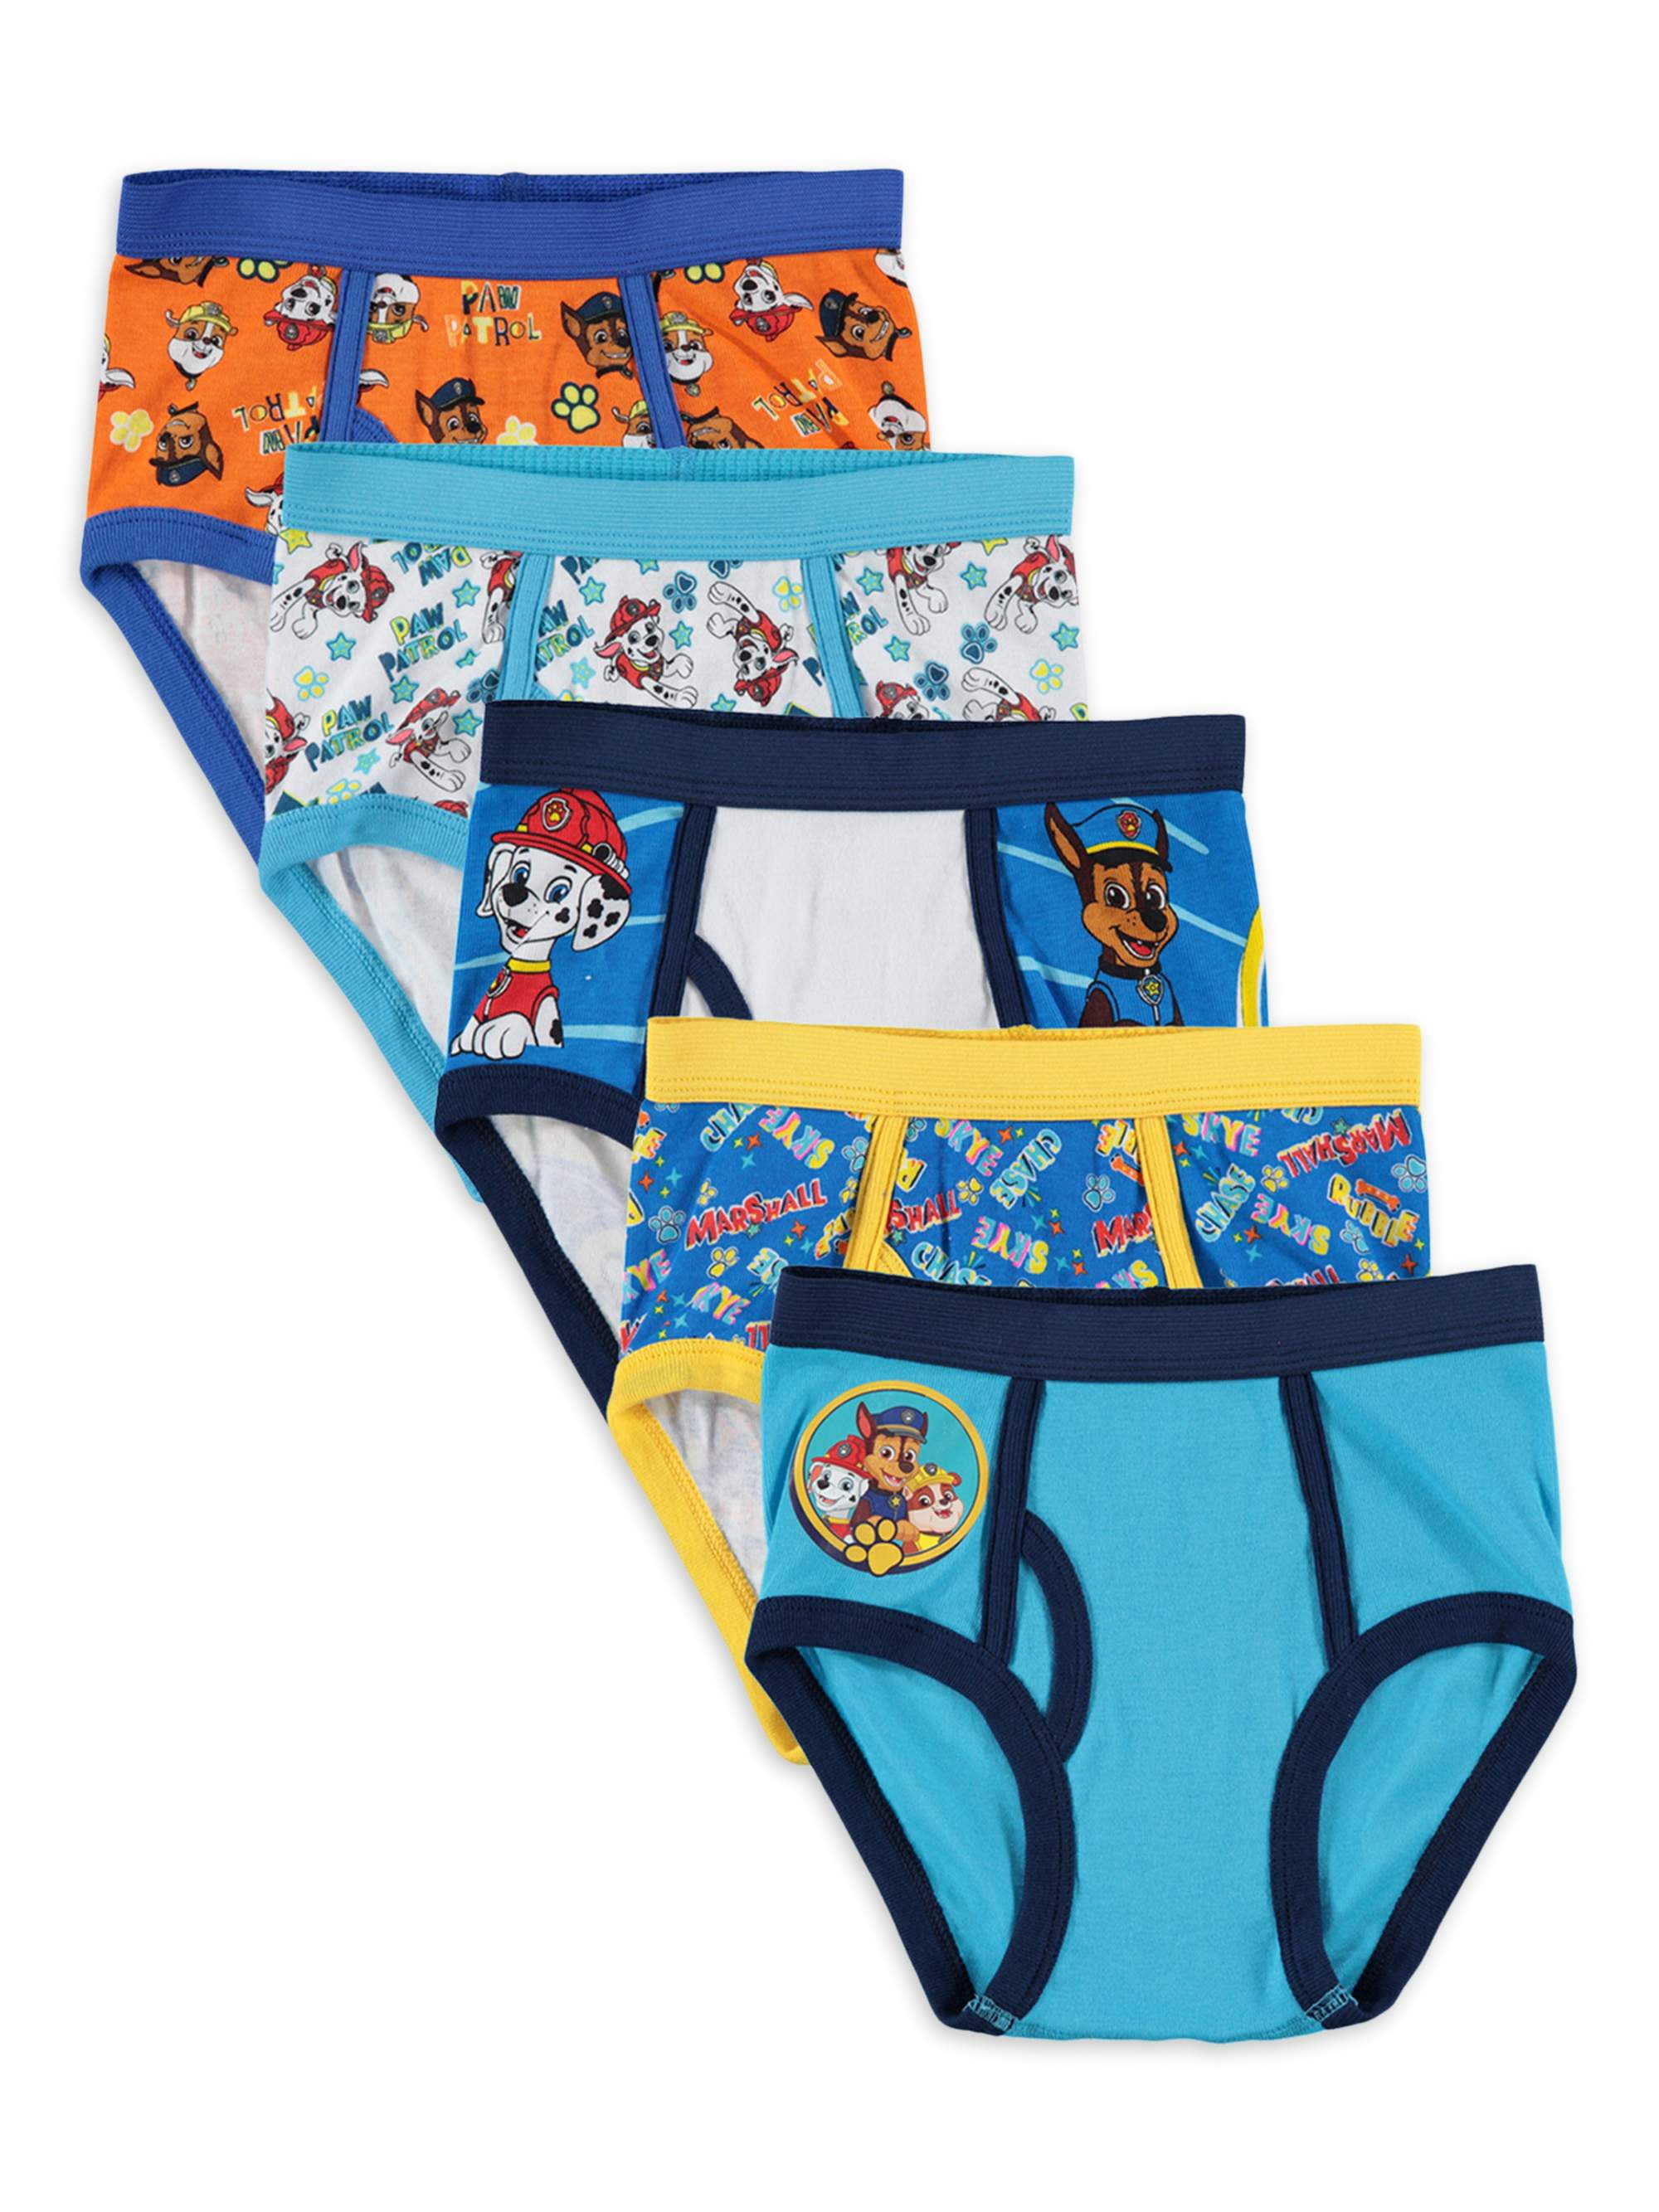 Kids Boys Paw Patrol 2 Pack Character Vest Tops Cotton Underwear Ages 18M-5Y 